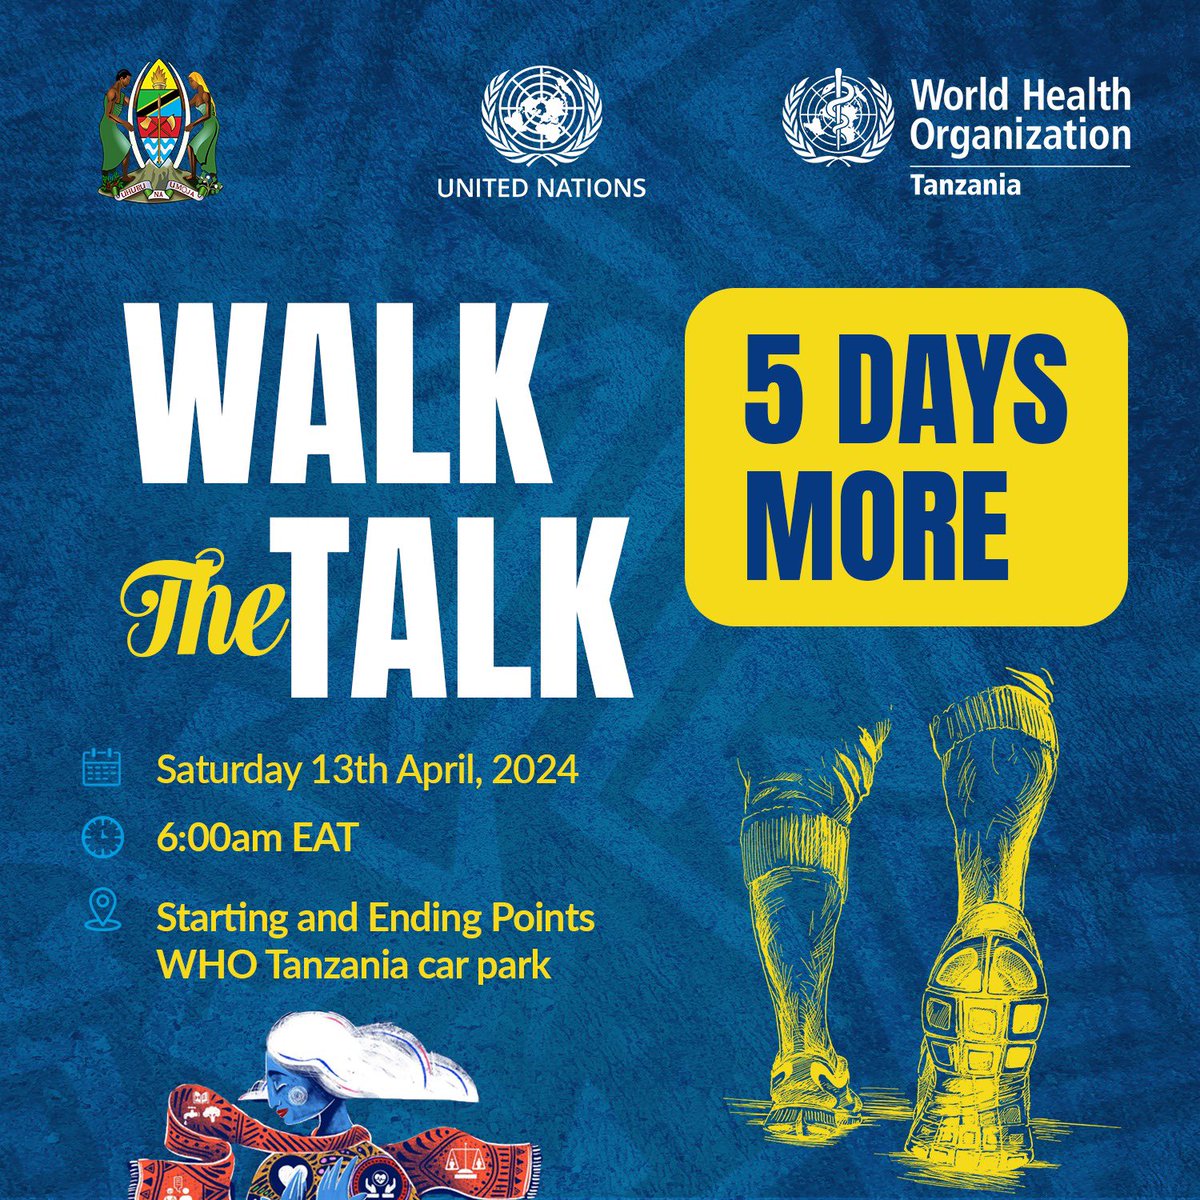 On Saturday, our 3 main offices; Dodoma, Zanzibar and Dar es Salaam will host the #WalktheTalk challenge and health outreach with @wizara_afyatz . This is part of the commemoration of #WorldHealthDay2024. Are you joining us ? Let us know in the comment!!!